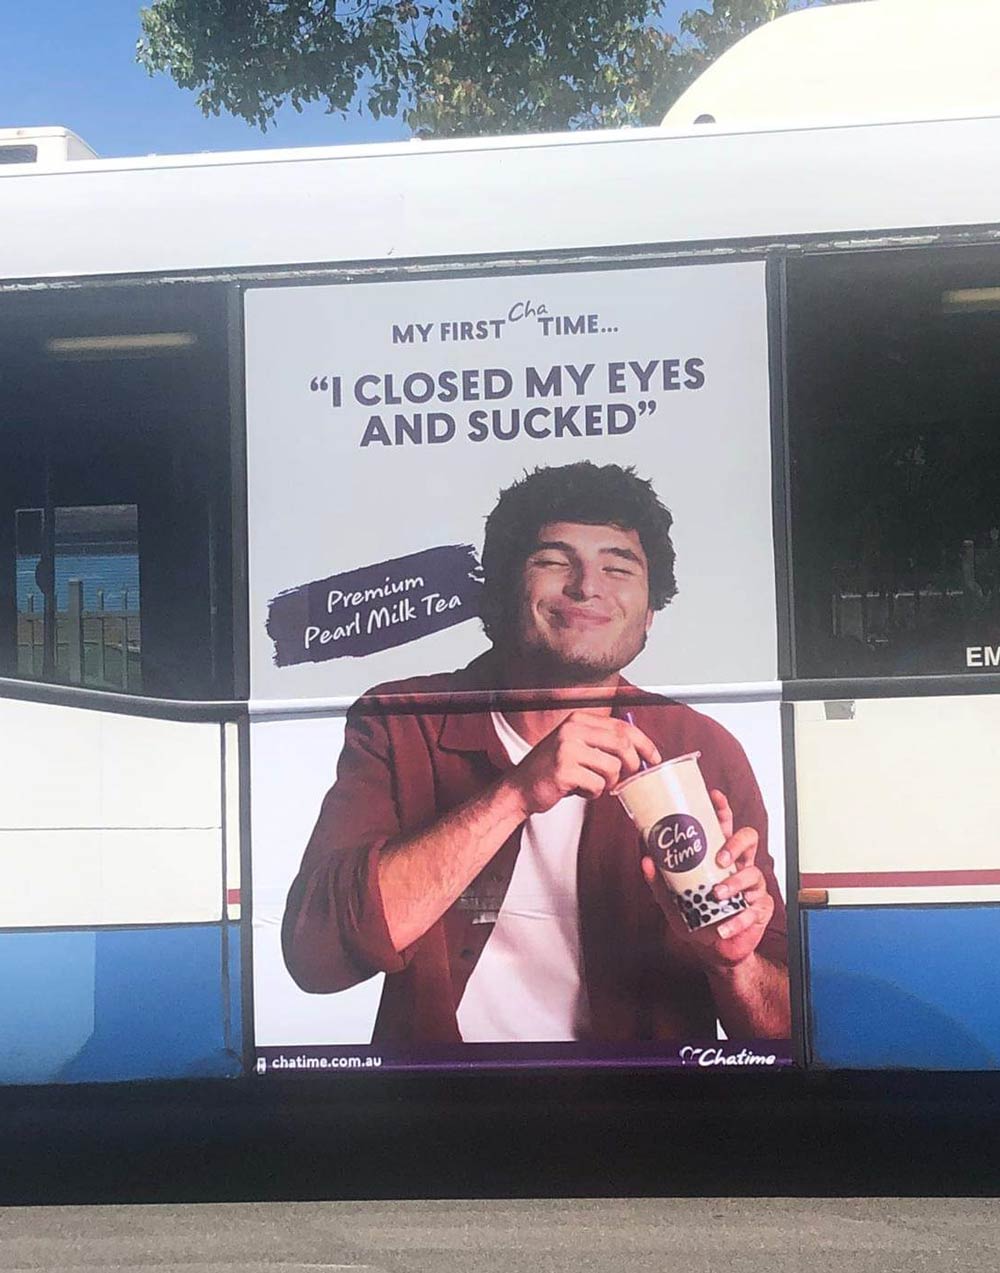 A friend saw this on a bus in Sydney